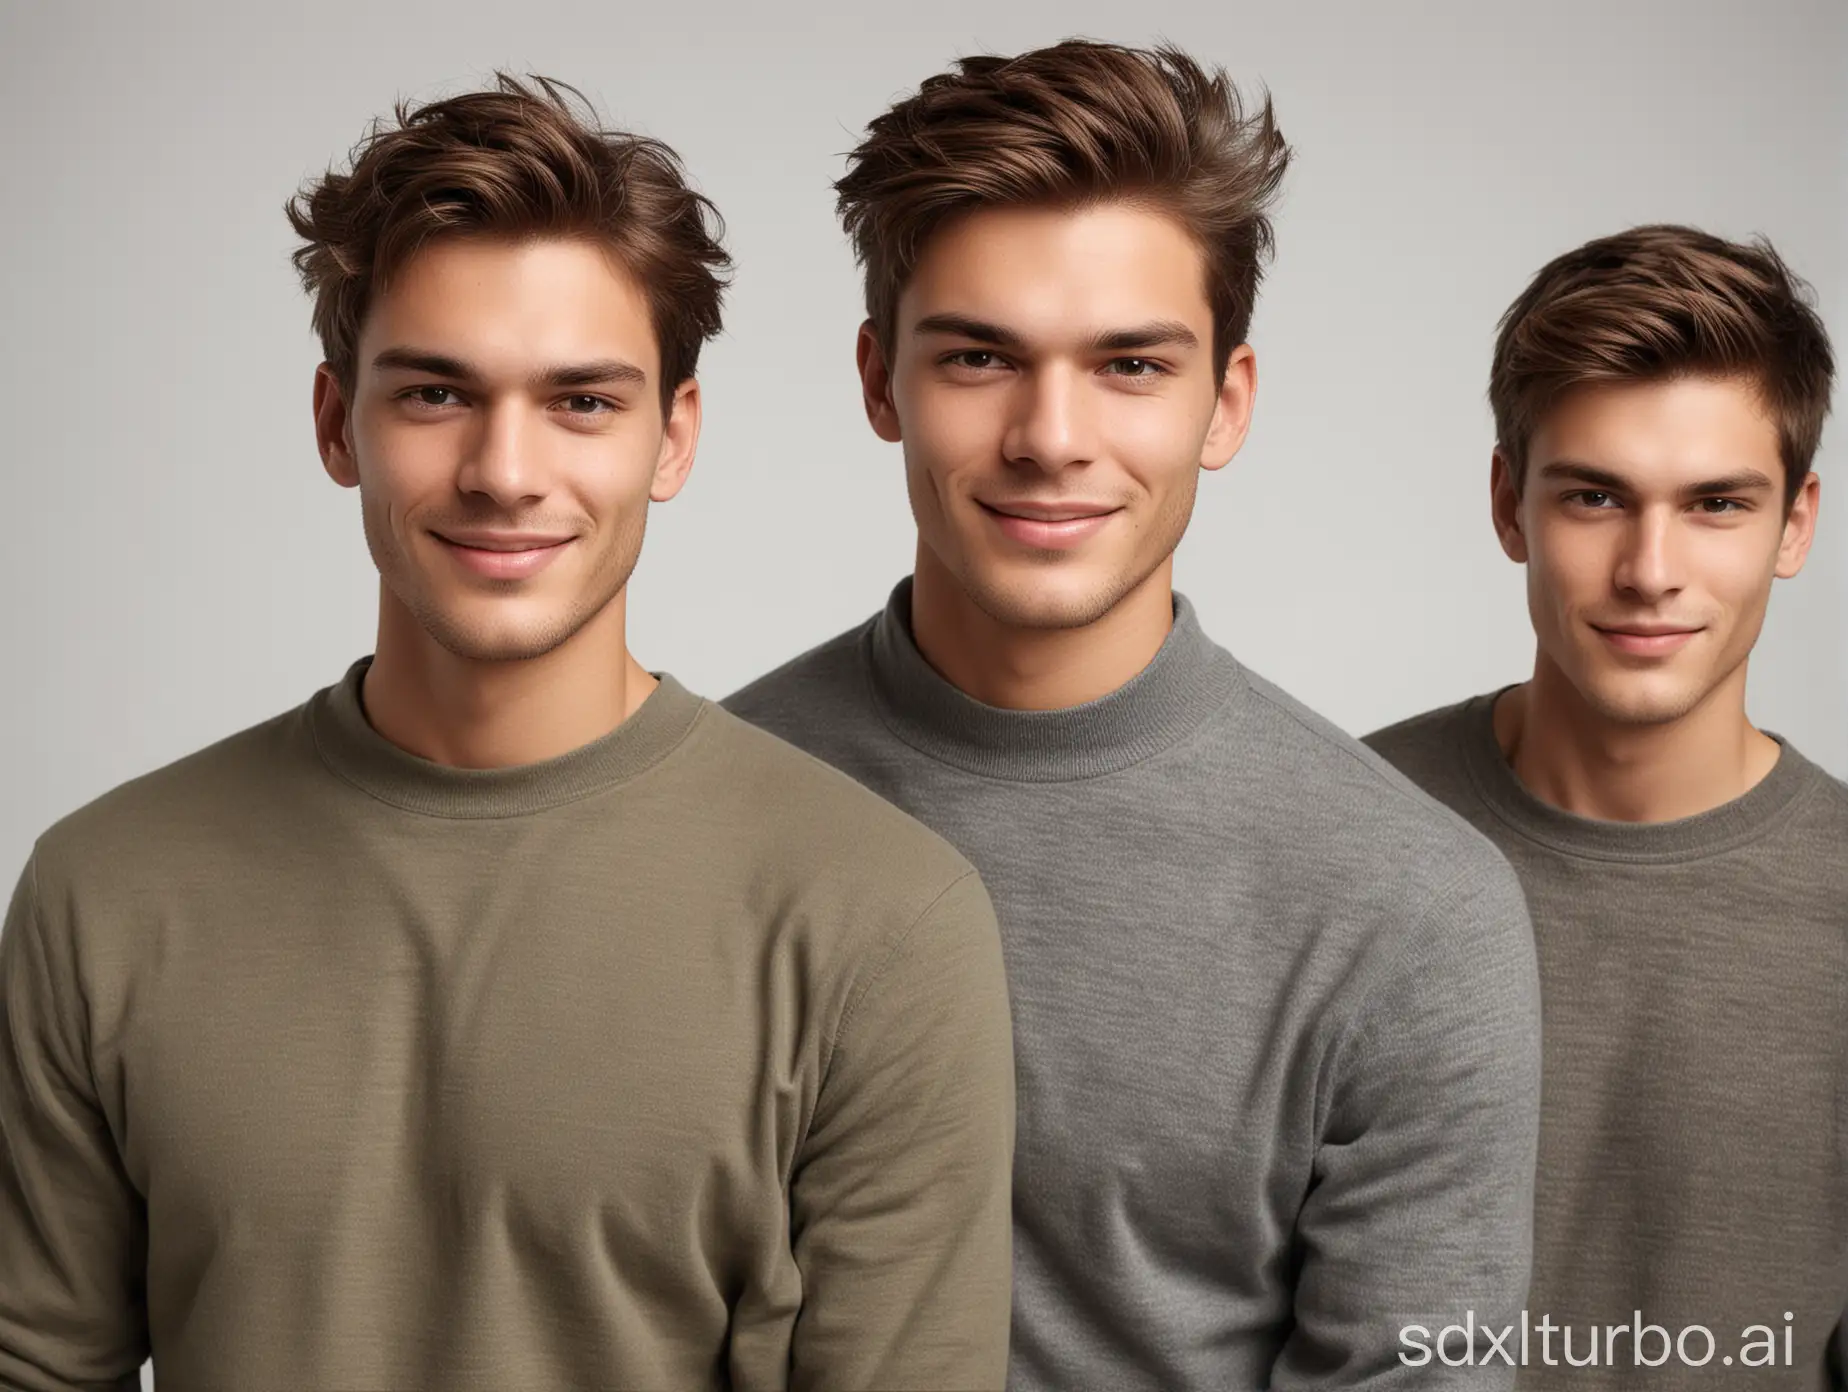 Three-Male-Models-in-Studio-Setting-One-Smiling-and-One-Serious